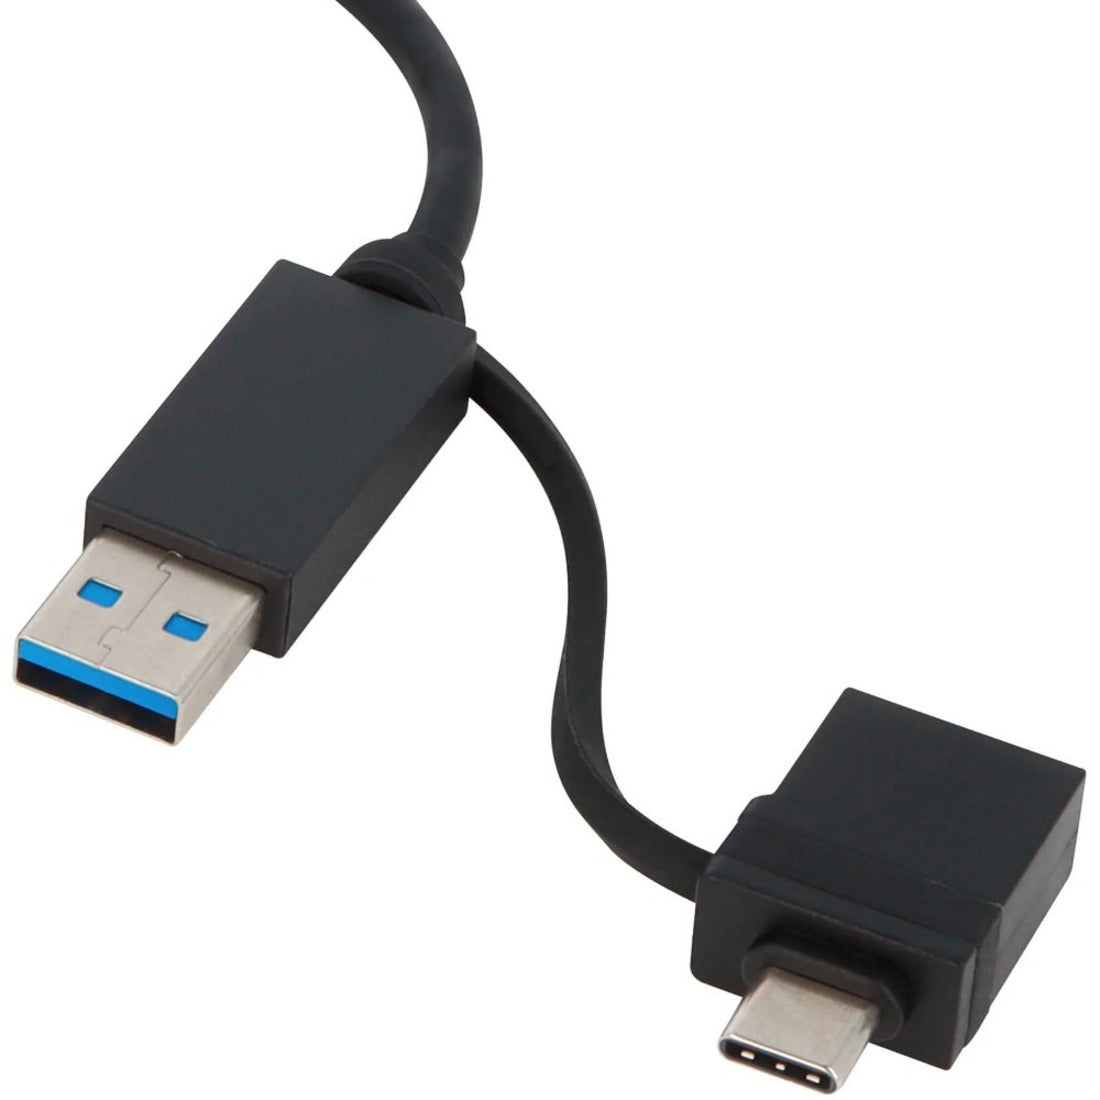 VisionTek 901505 VT80 USB 3.0 to DisplayPort Adapter, Plug and Play, 3840 x 2160 Resolution Supported